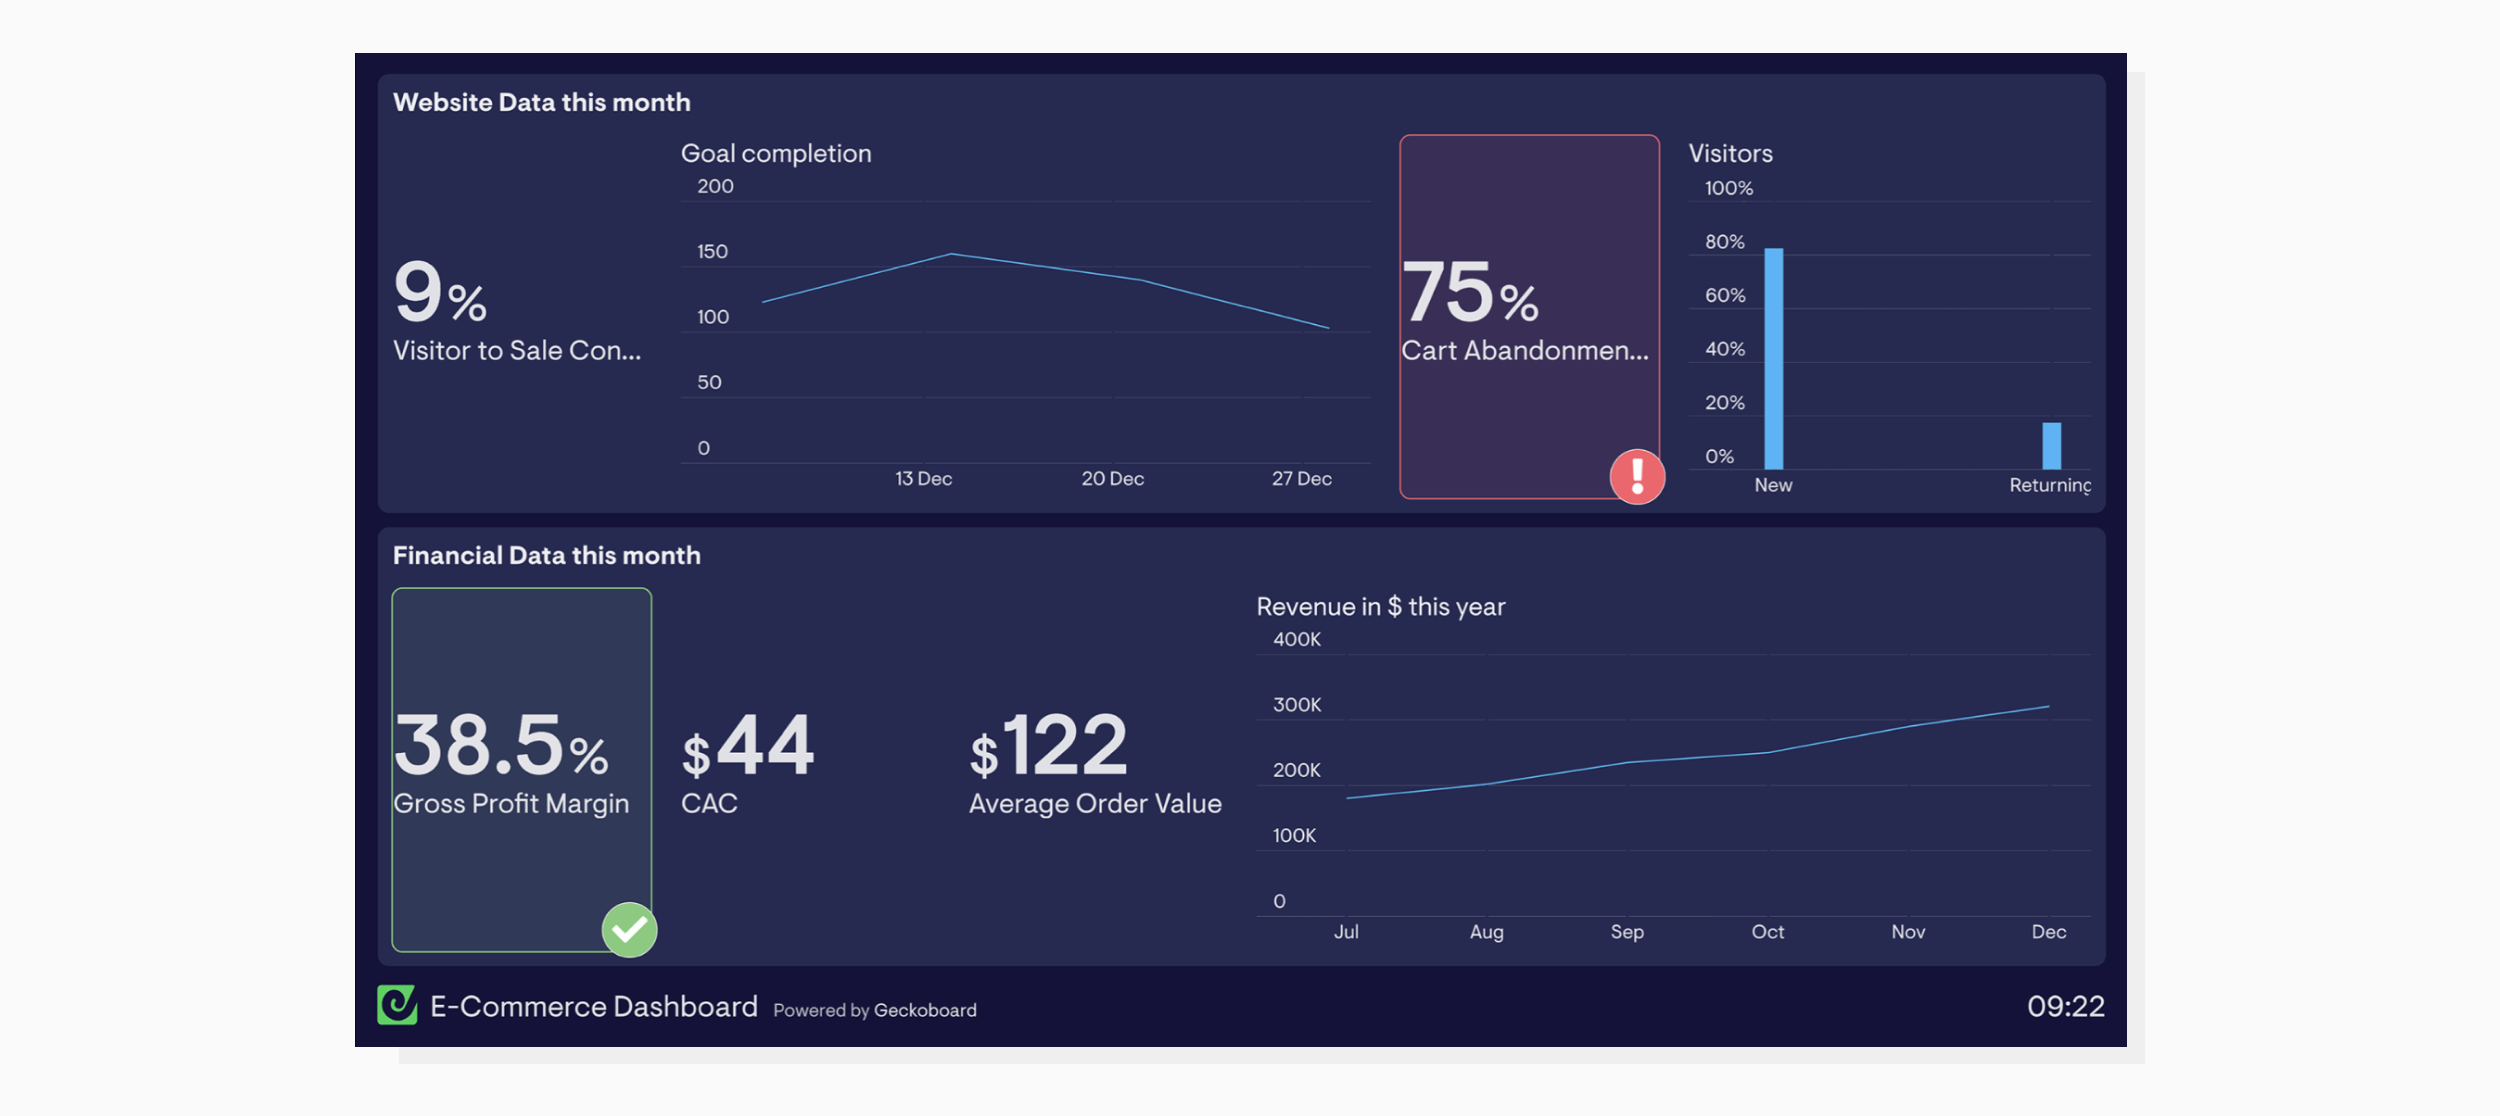 An ecommerce dashboard by geckoboard